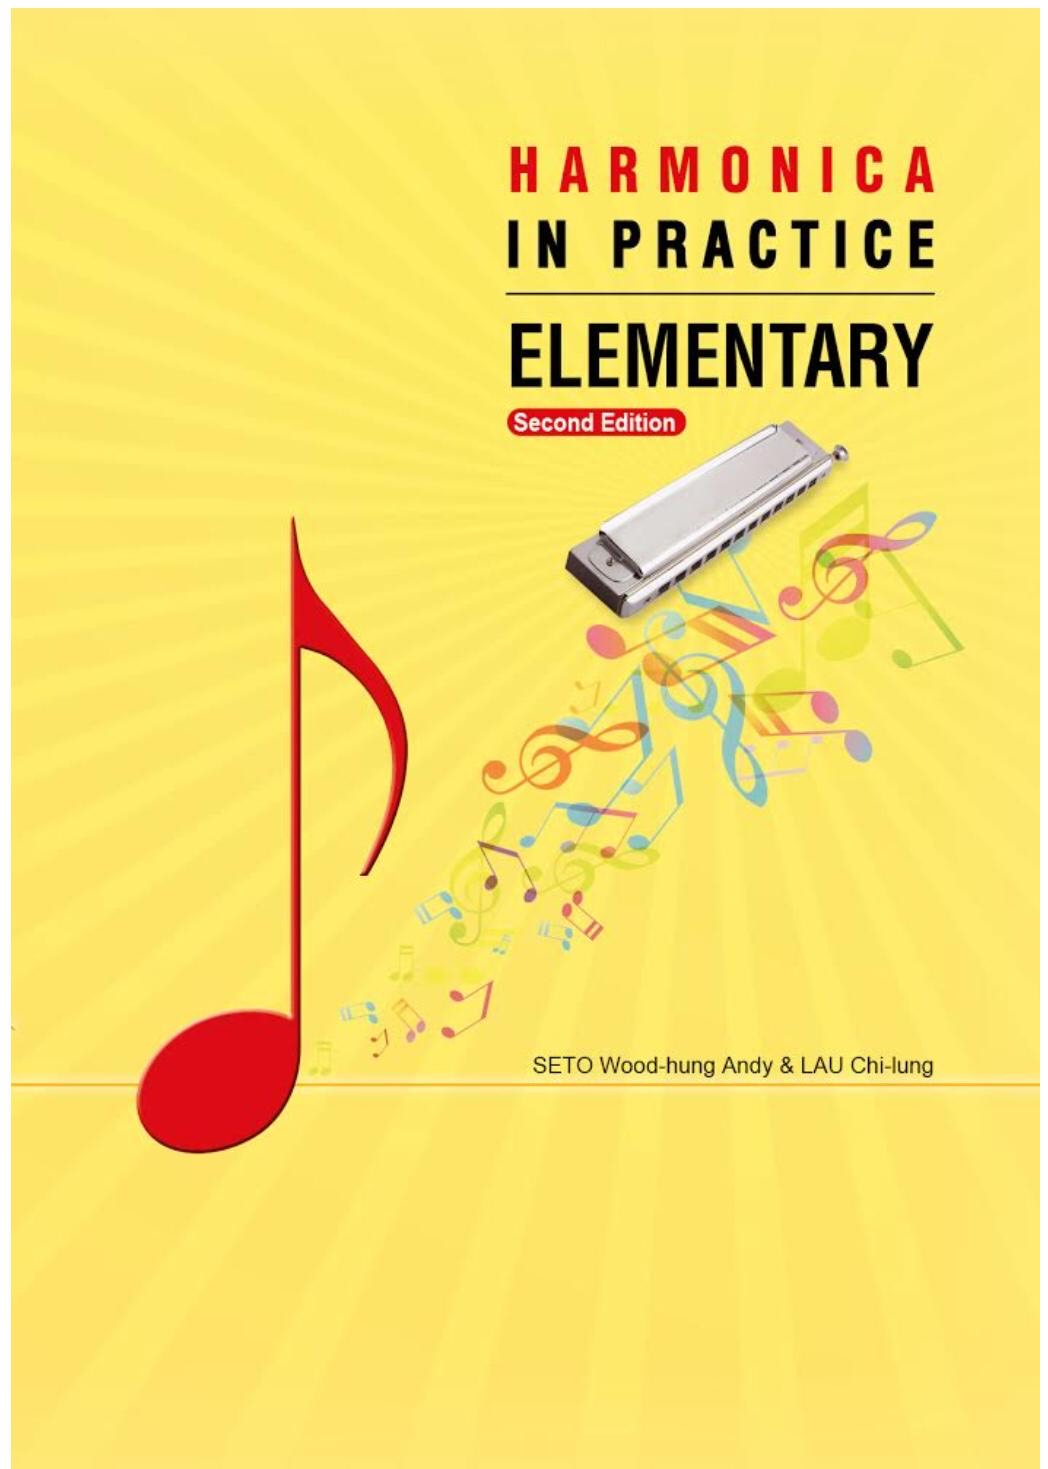 Harmonica In Practice (Elementary) 2nd Edition